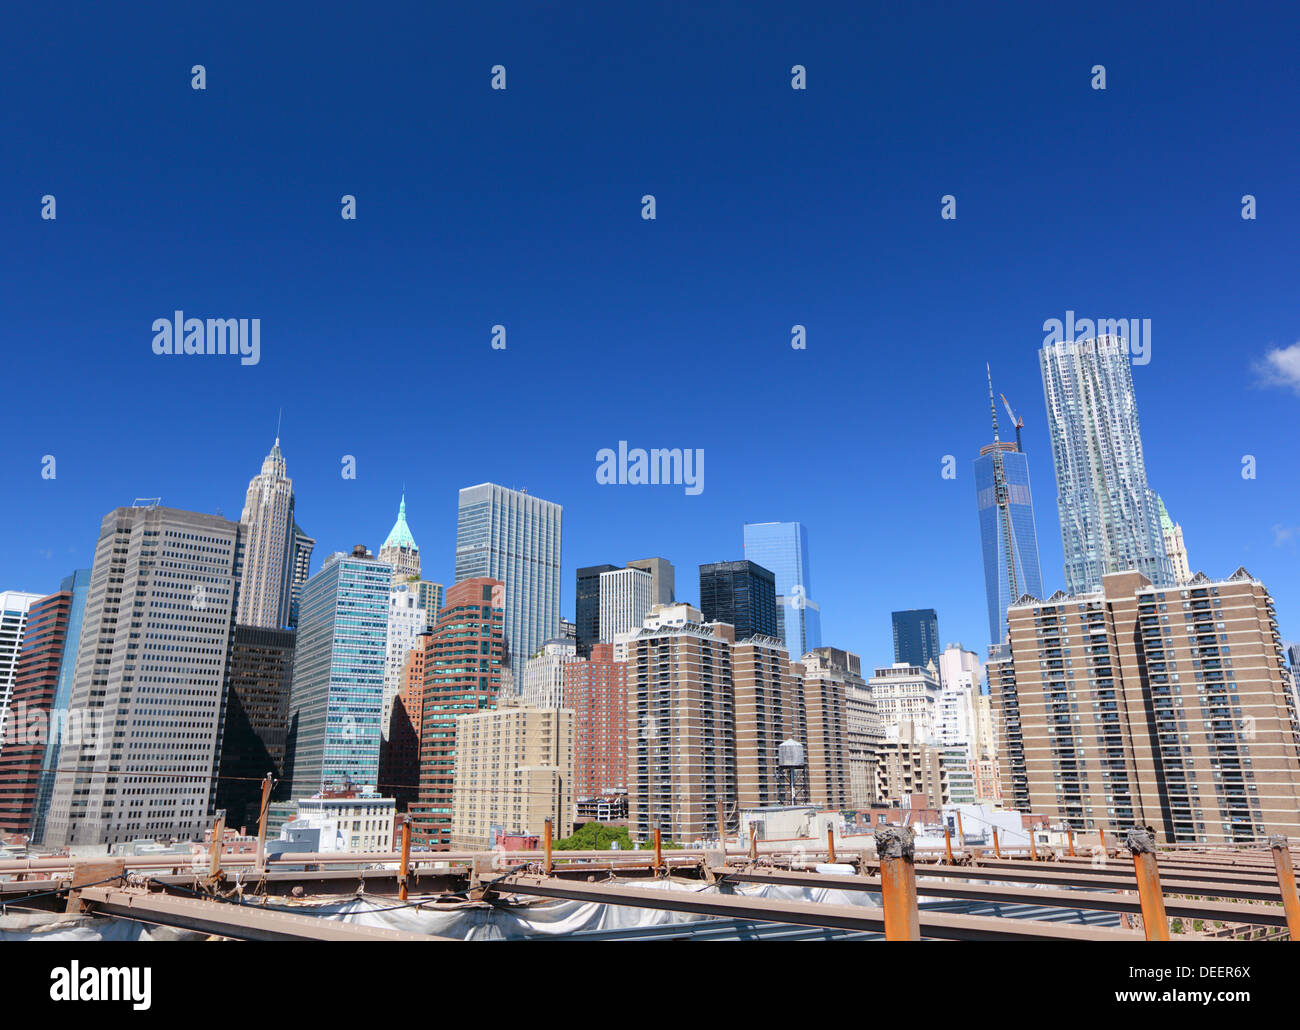 Lower Manhattan Skyline including the Freedom Tower under construction in June 2013, New York City, USA. Stock Photo